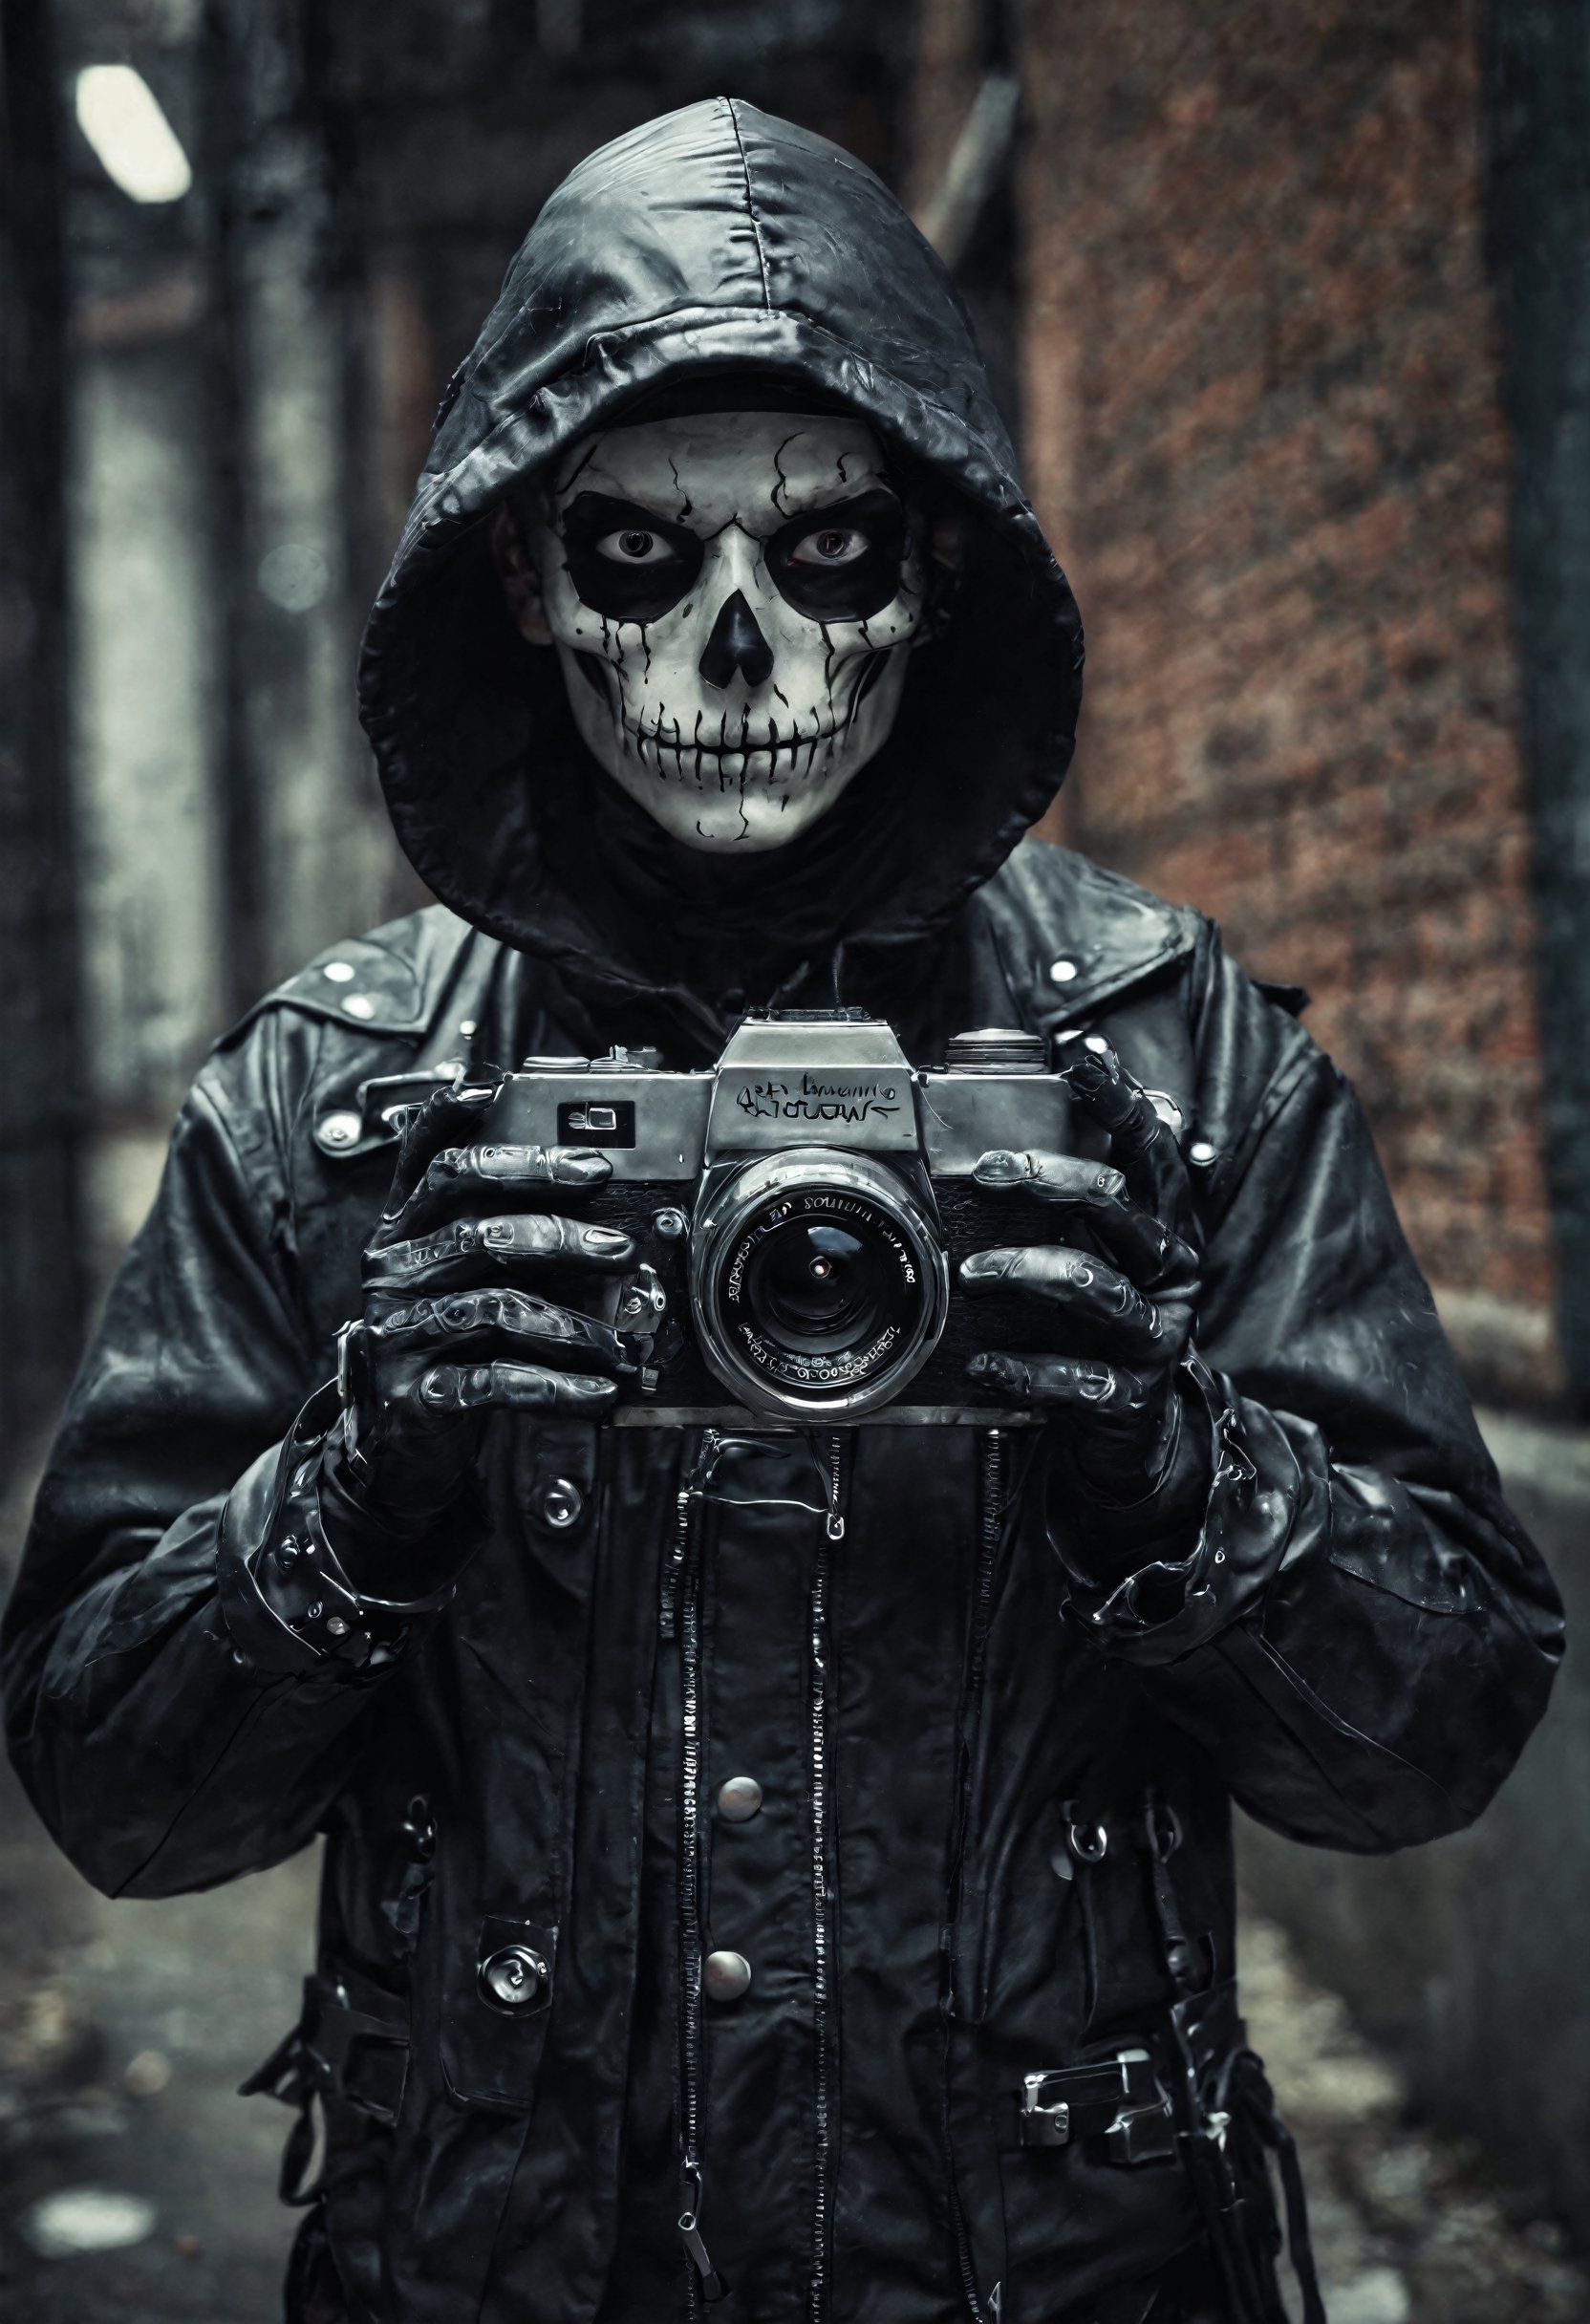 macabre style gritty street photography, holding a camera, young hacker, urban, matrixpunk cyber-costume, . dark, gothic, grim, haunting, highly detailed,
